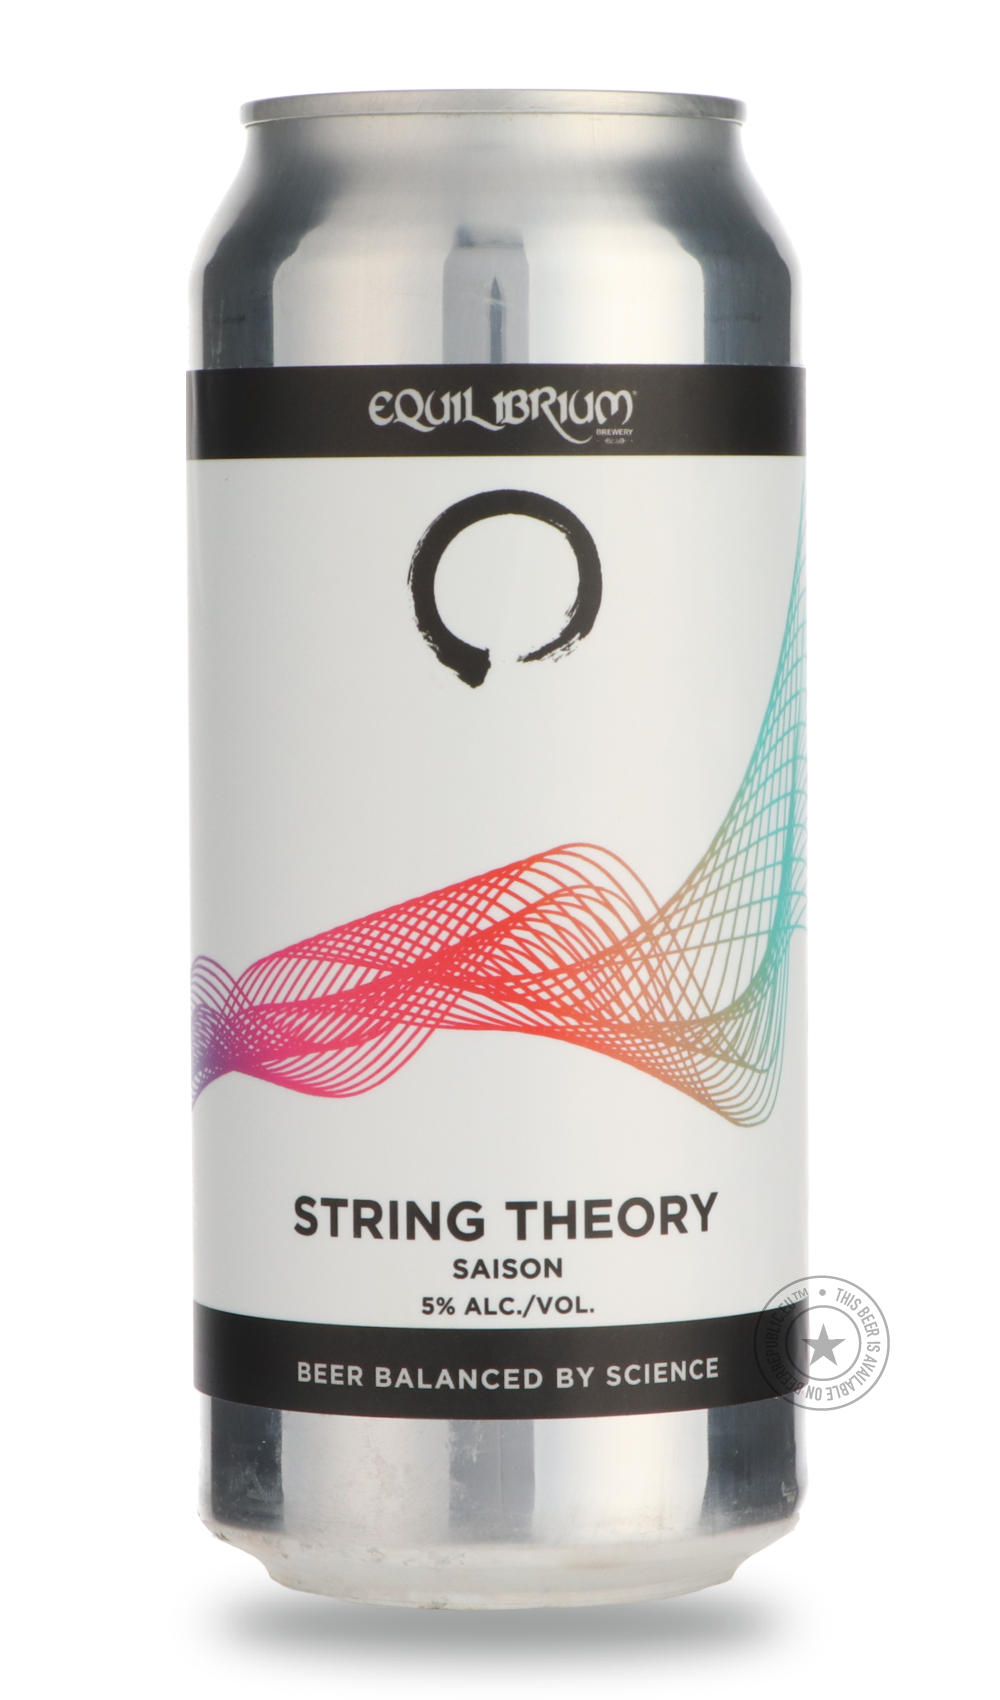 -Equilibrium- String Theory-Pale- Only @ Beer Republic - The best online beer store for American & Canadian craft beer - Buy beer online from the USA and Canada - Bier online kopen - Amerikaans bier kopen - Craft beer store - Craft beer kopen - Amerikanisch bier kaufen - Bier online kaufen - Acheter biere online - IPA - Stout - Porter - New England IPA - Hazy IPA - Imperial Stout - Barrel Aged - Barrel Aged Imperial Stout - Brown - Dark beer - Blond - Blonde - Pilsner - Lager - Wheat - Weizen - Amber - Barl